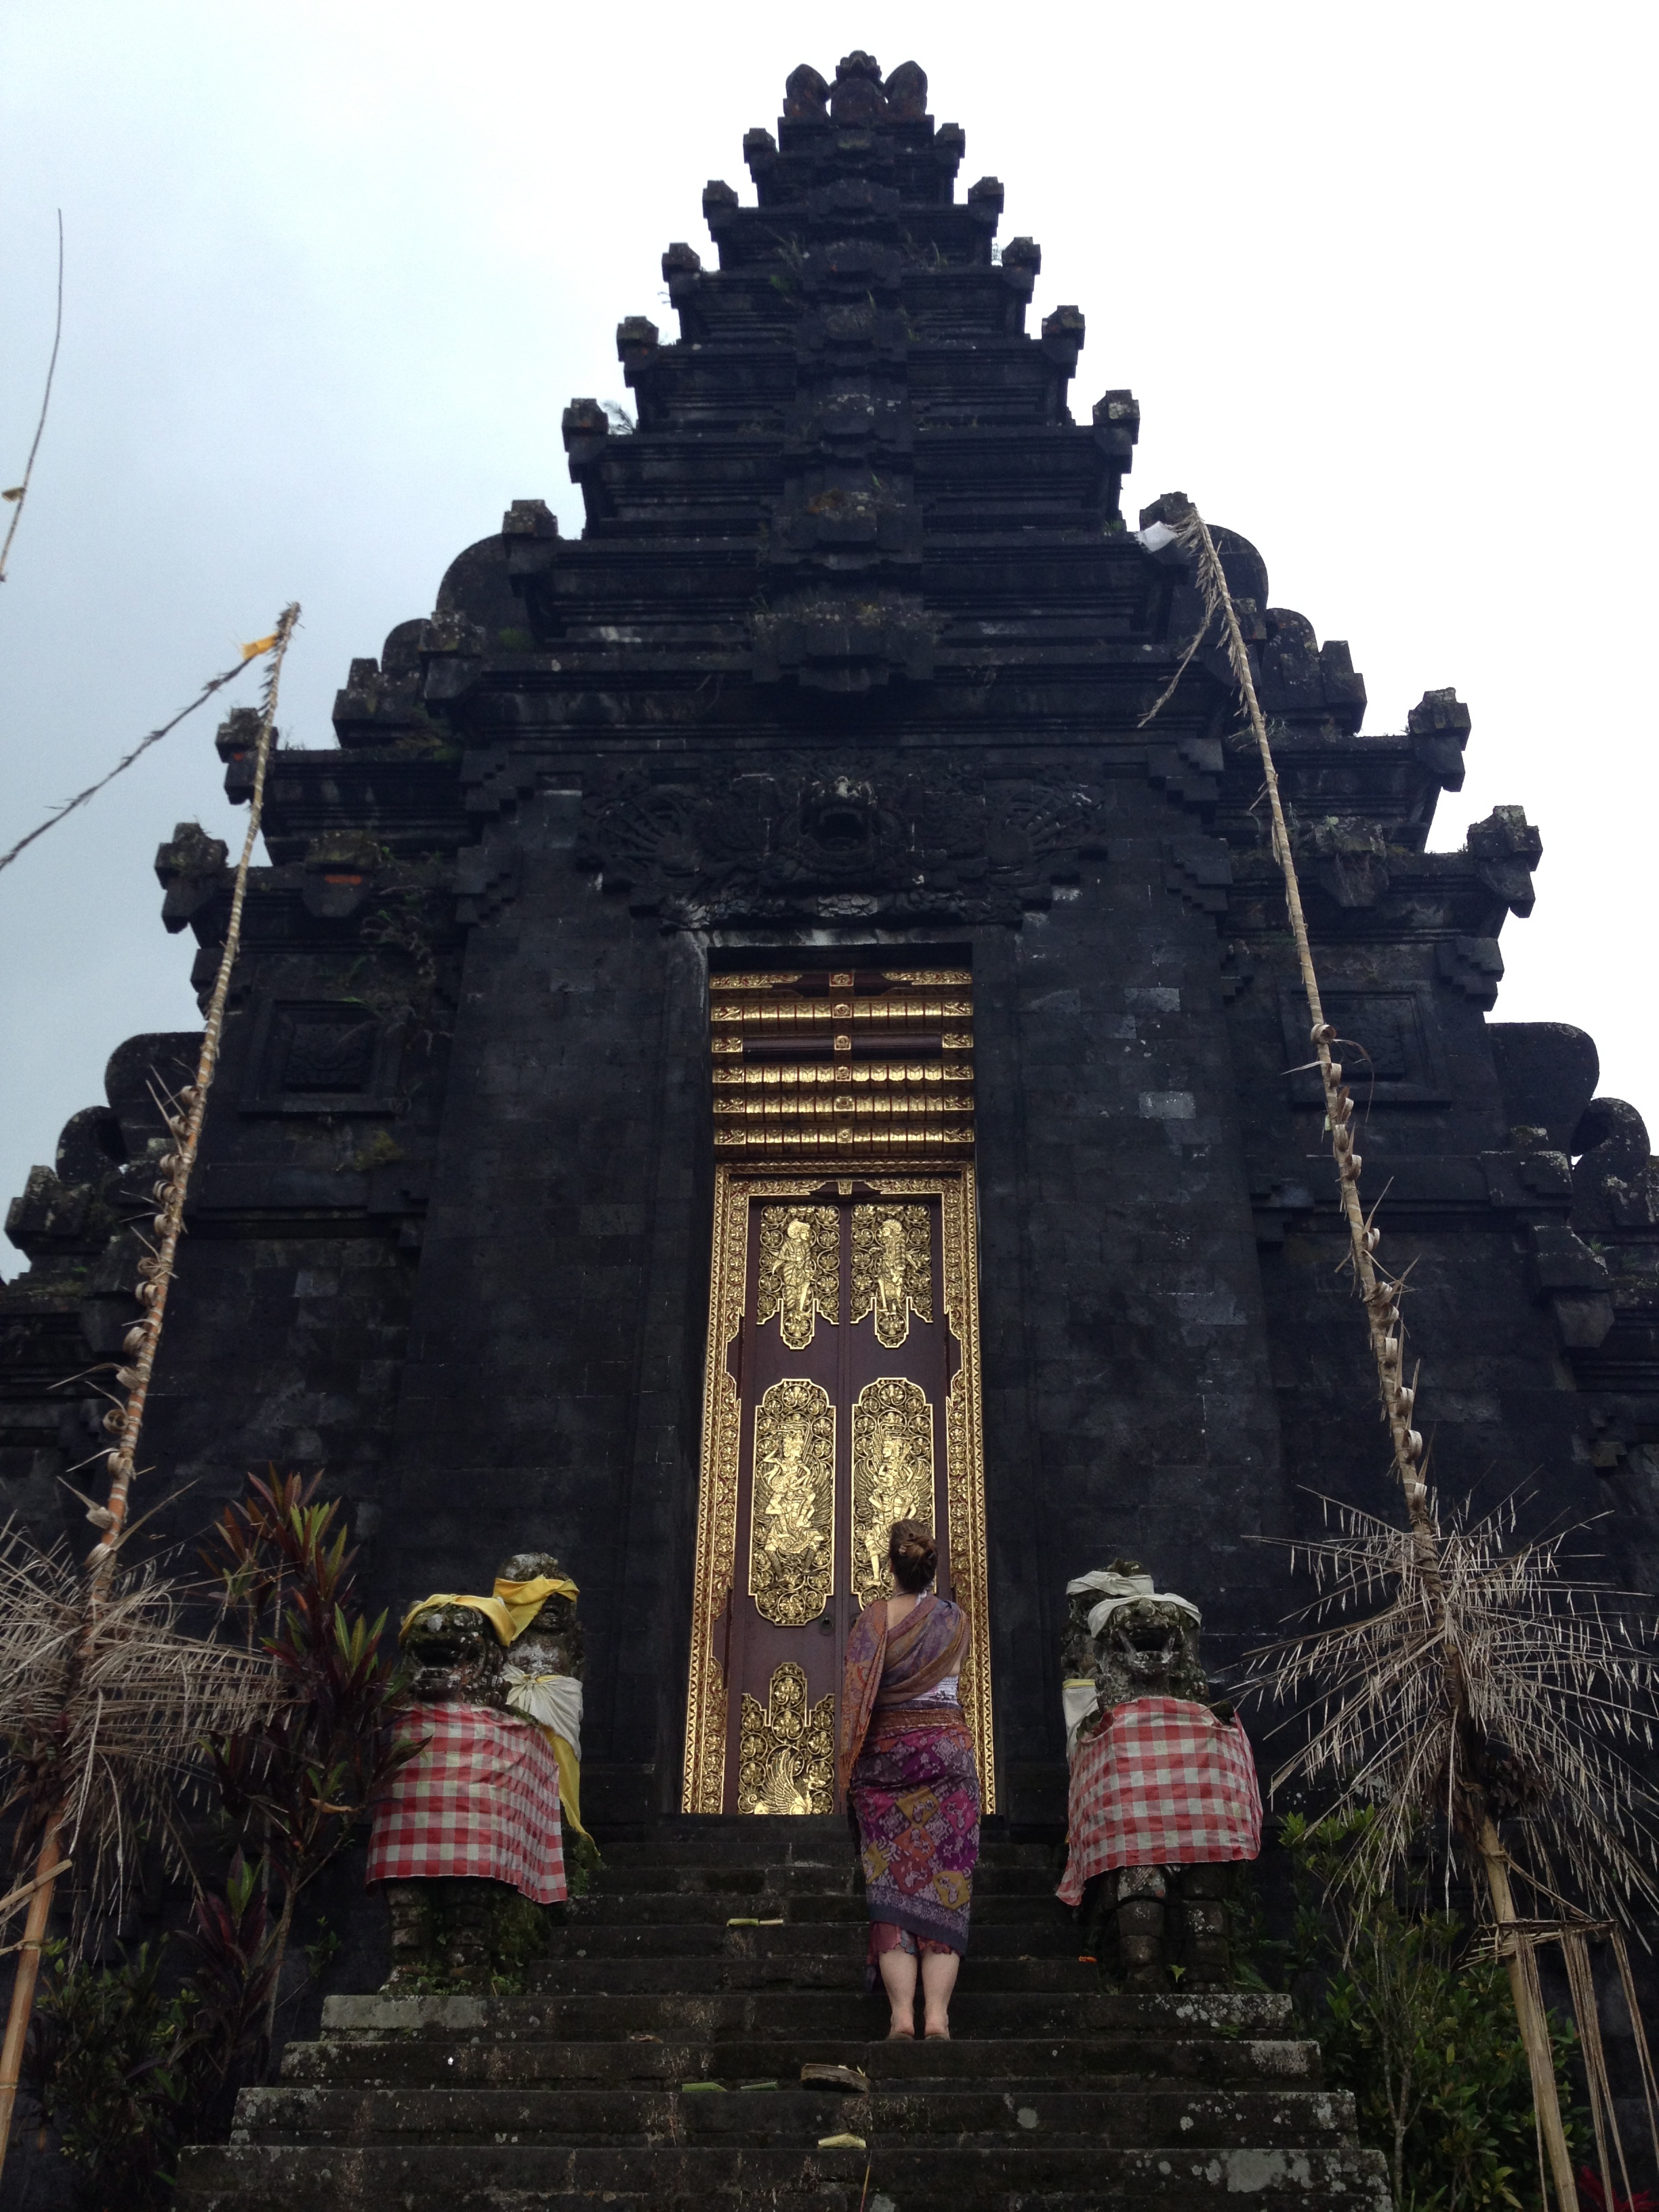 At the Mother Temple Mt Agung Volcano.JPG